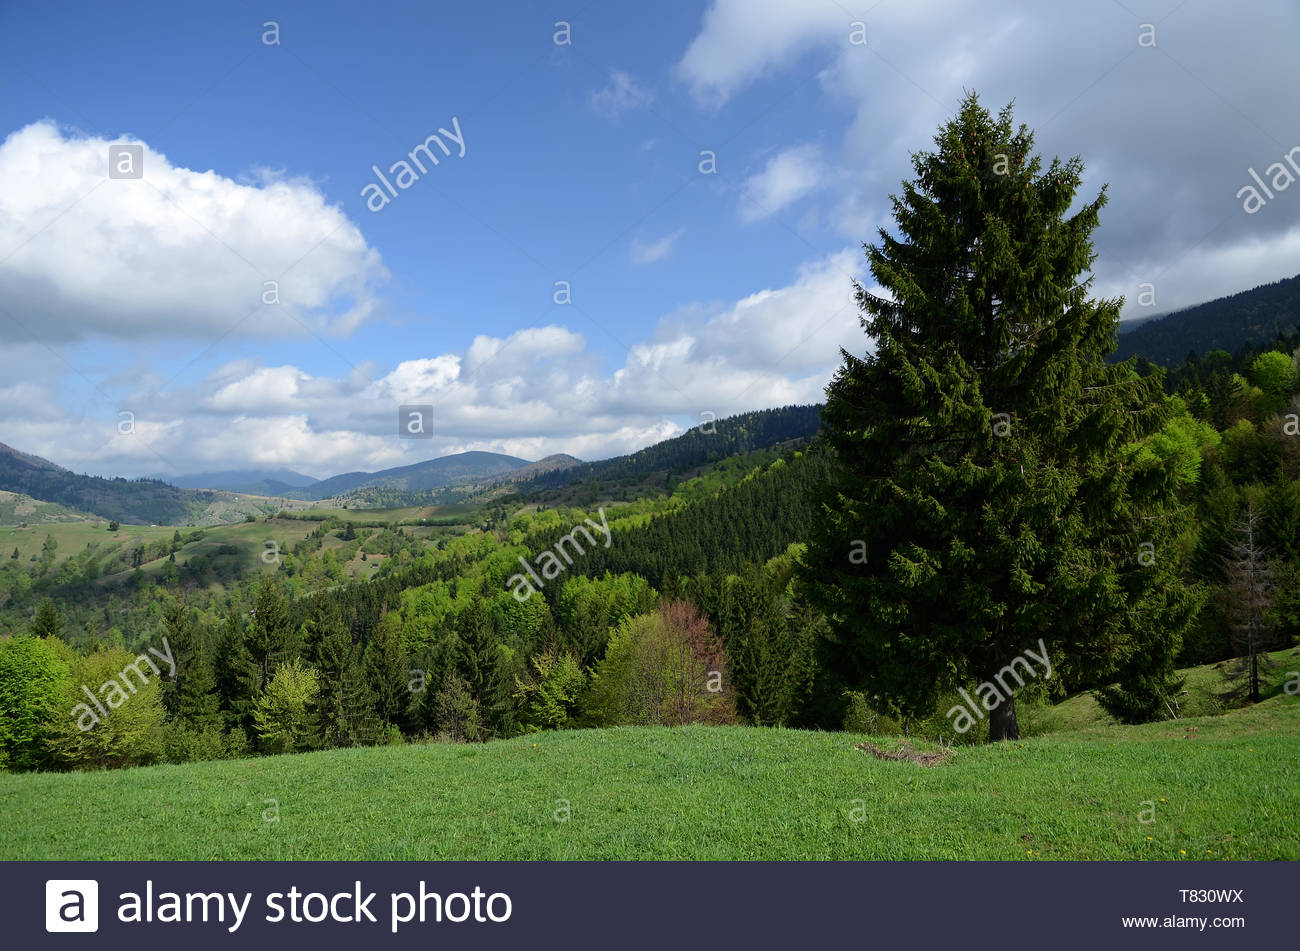 The Alpine Ridges Of Carpathian Mountains Are Surrounded By